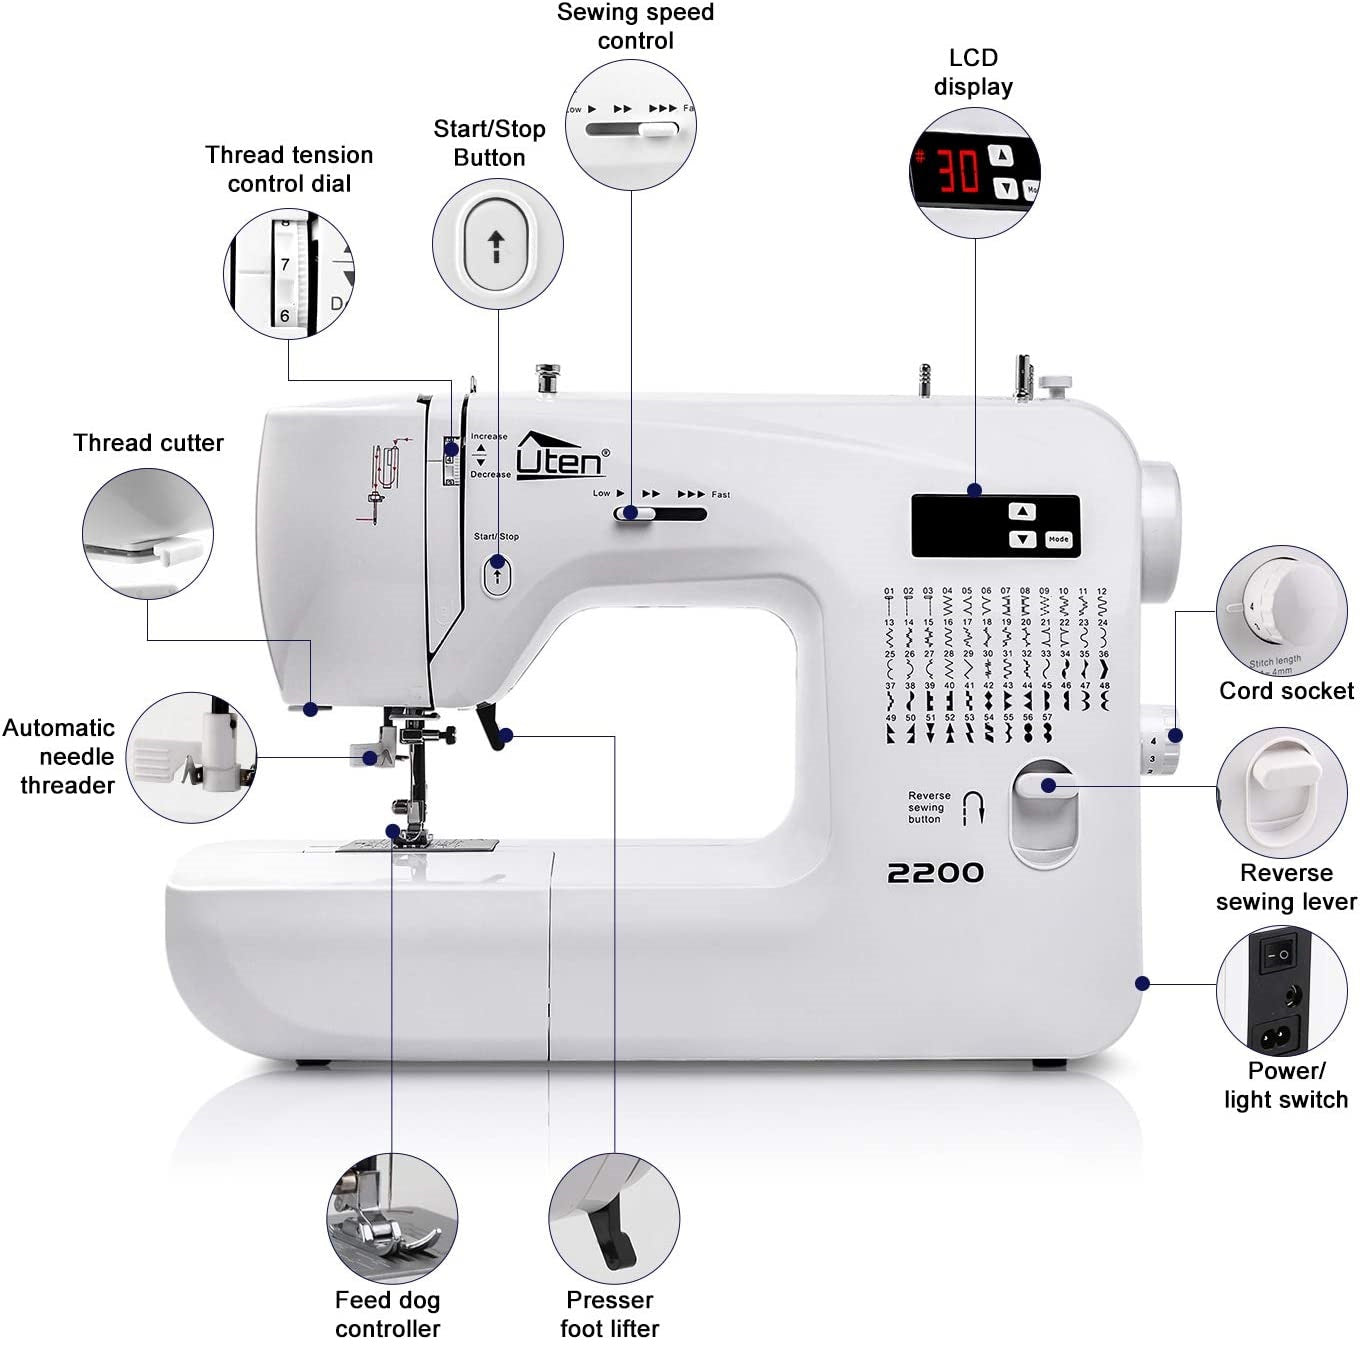 2200 Sewing Machine - All-In-One Computerized Embroidery & Quilting